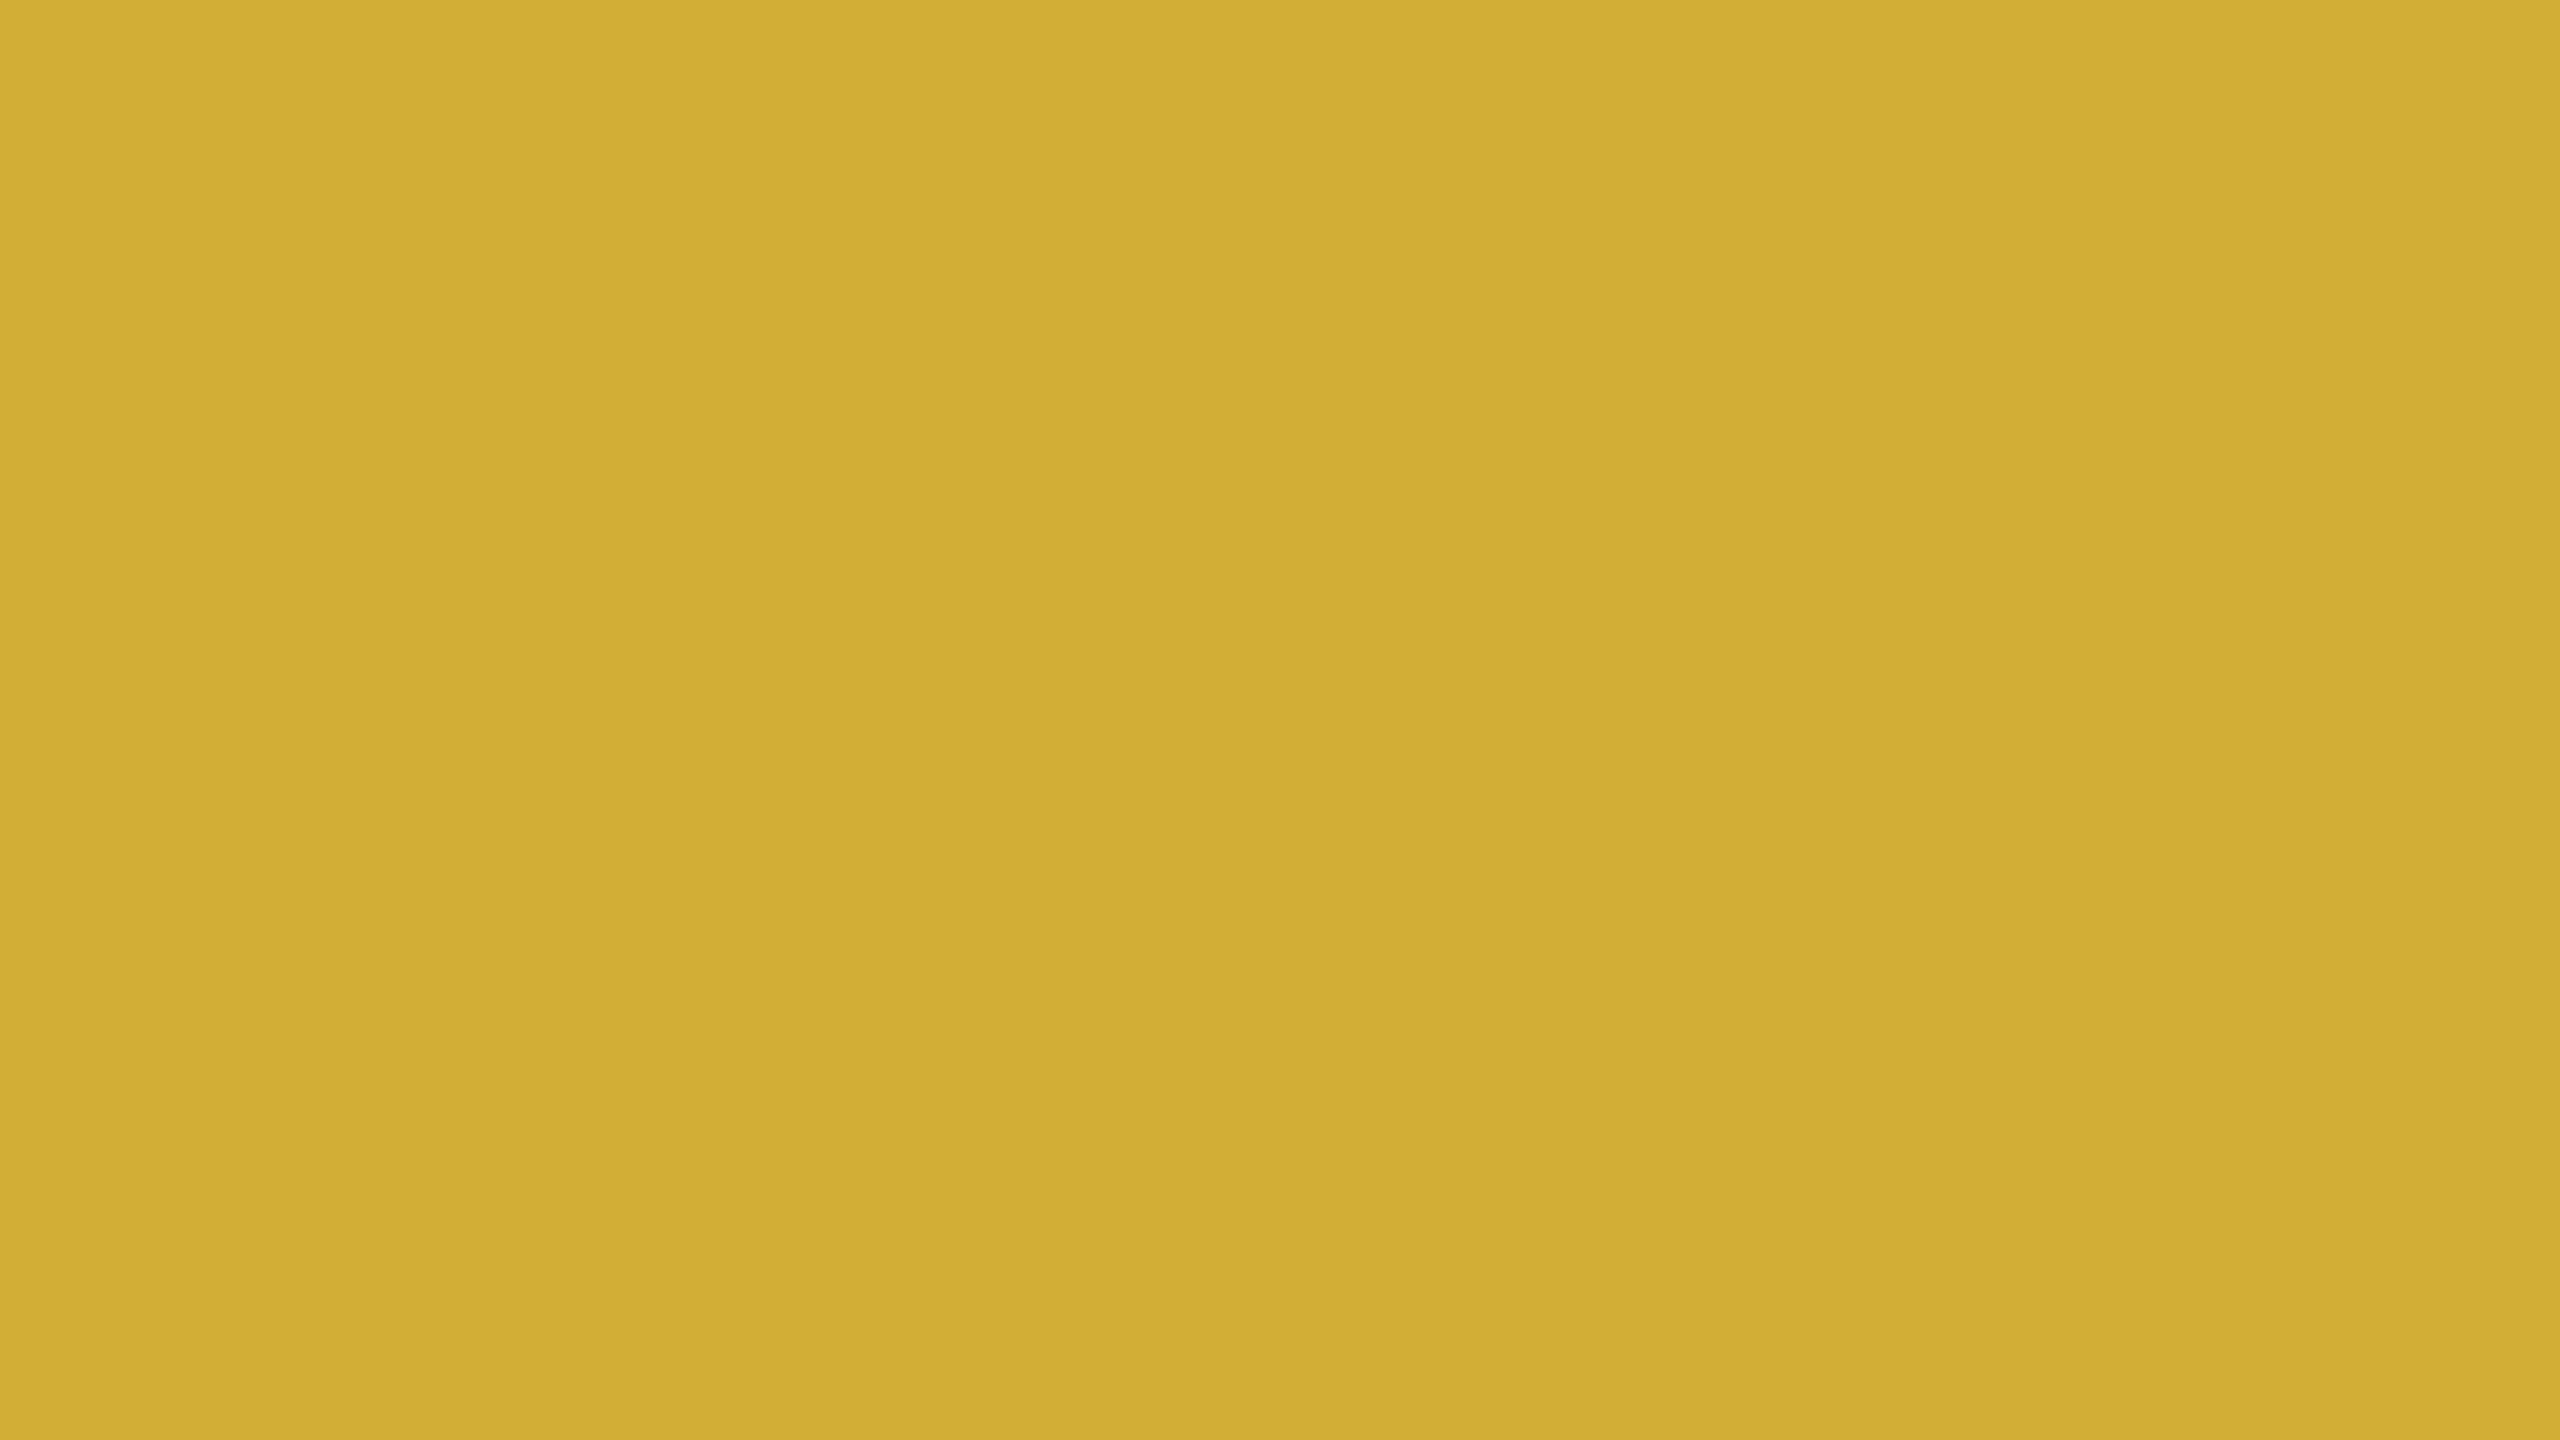 Free 2560x1440 resolution Gold Metallic solid color background view